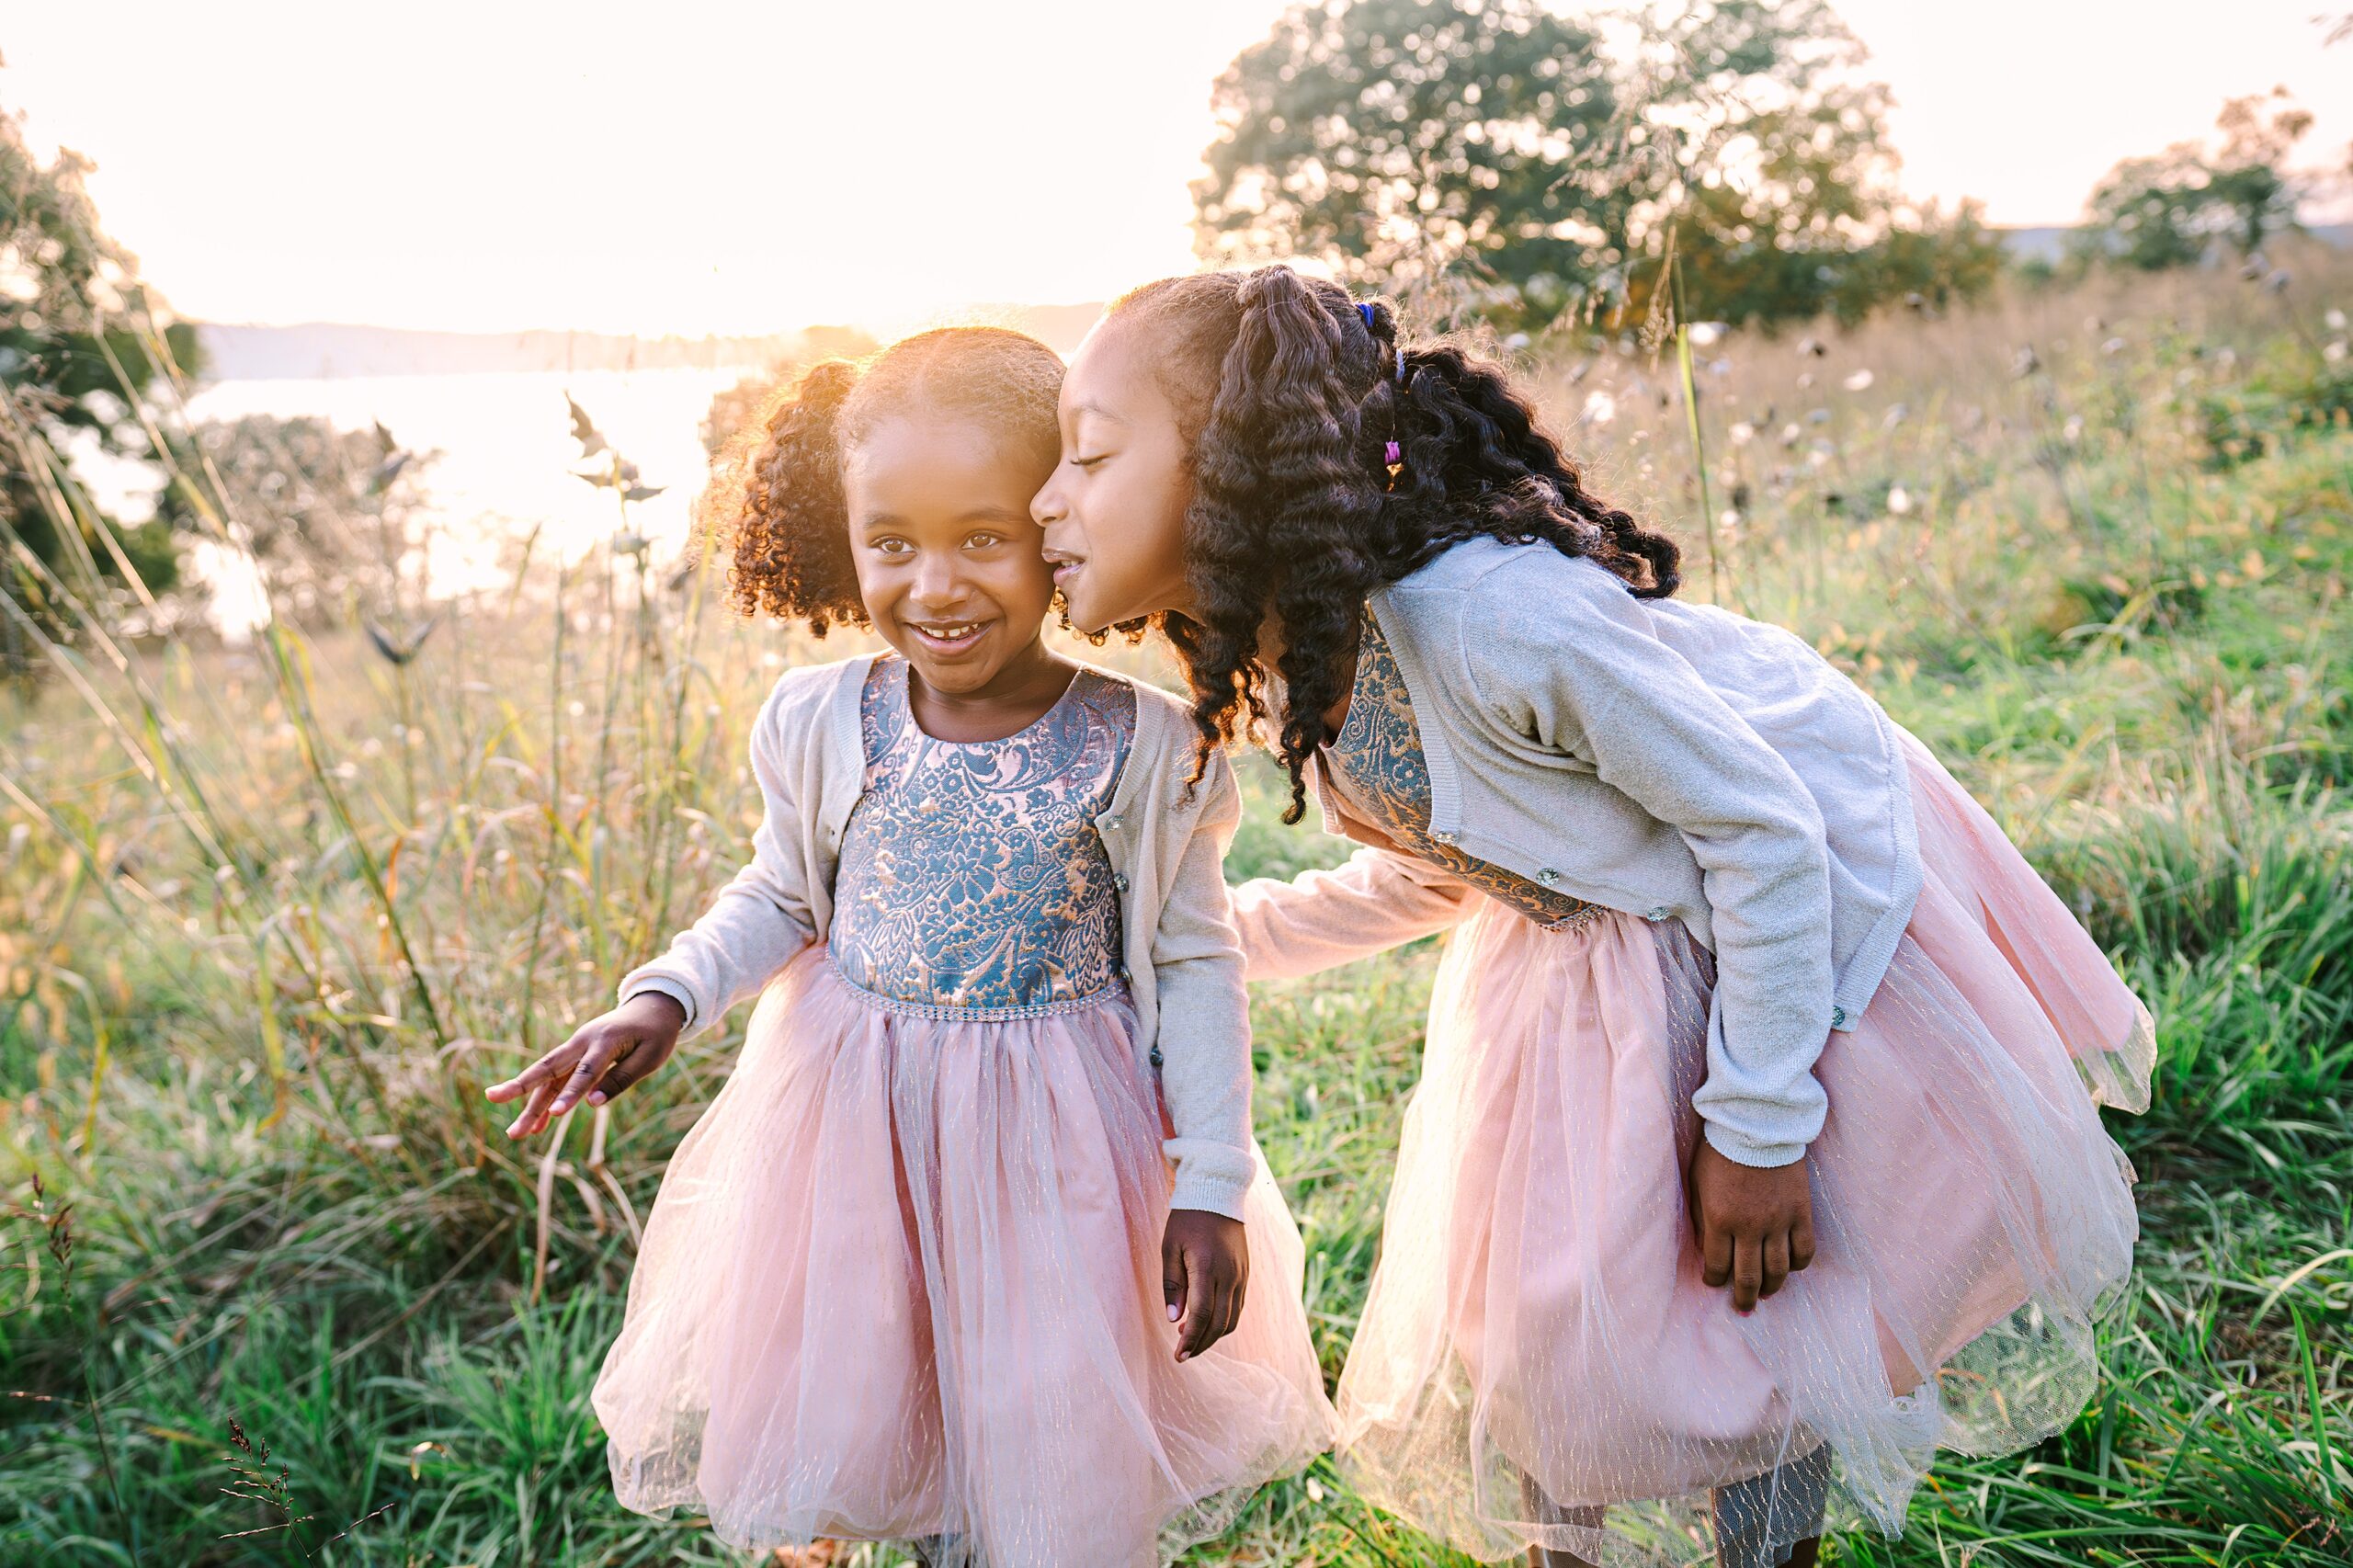 Two young sisters in pink dresses laughing in an open field.